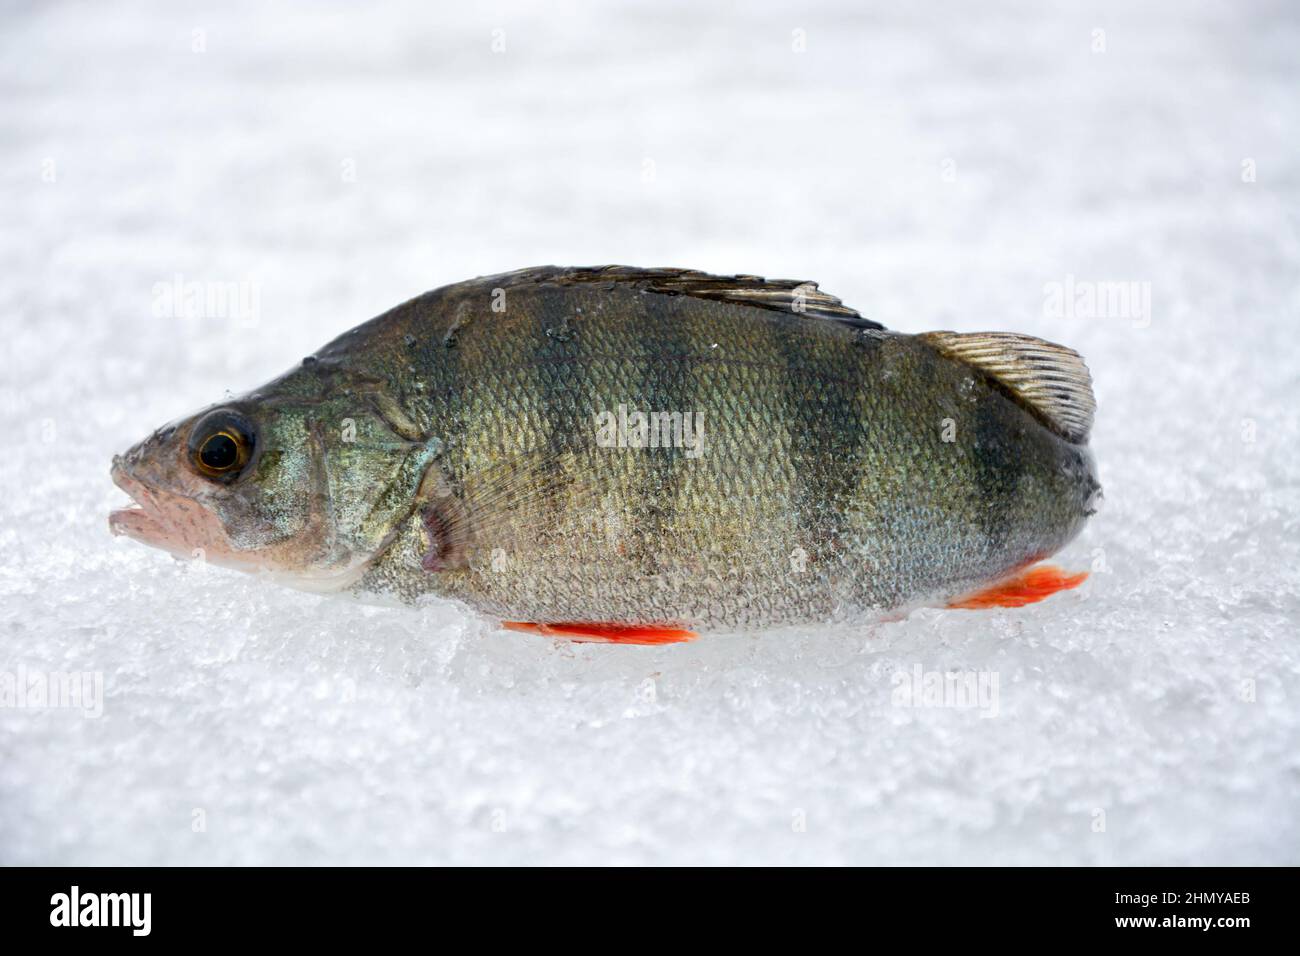 Fishing trophy in winter fishing - freshly caught perches on ice. Russian perch, winter fishing, freshly caught fish Stock Photo